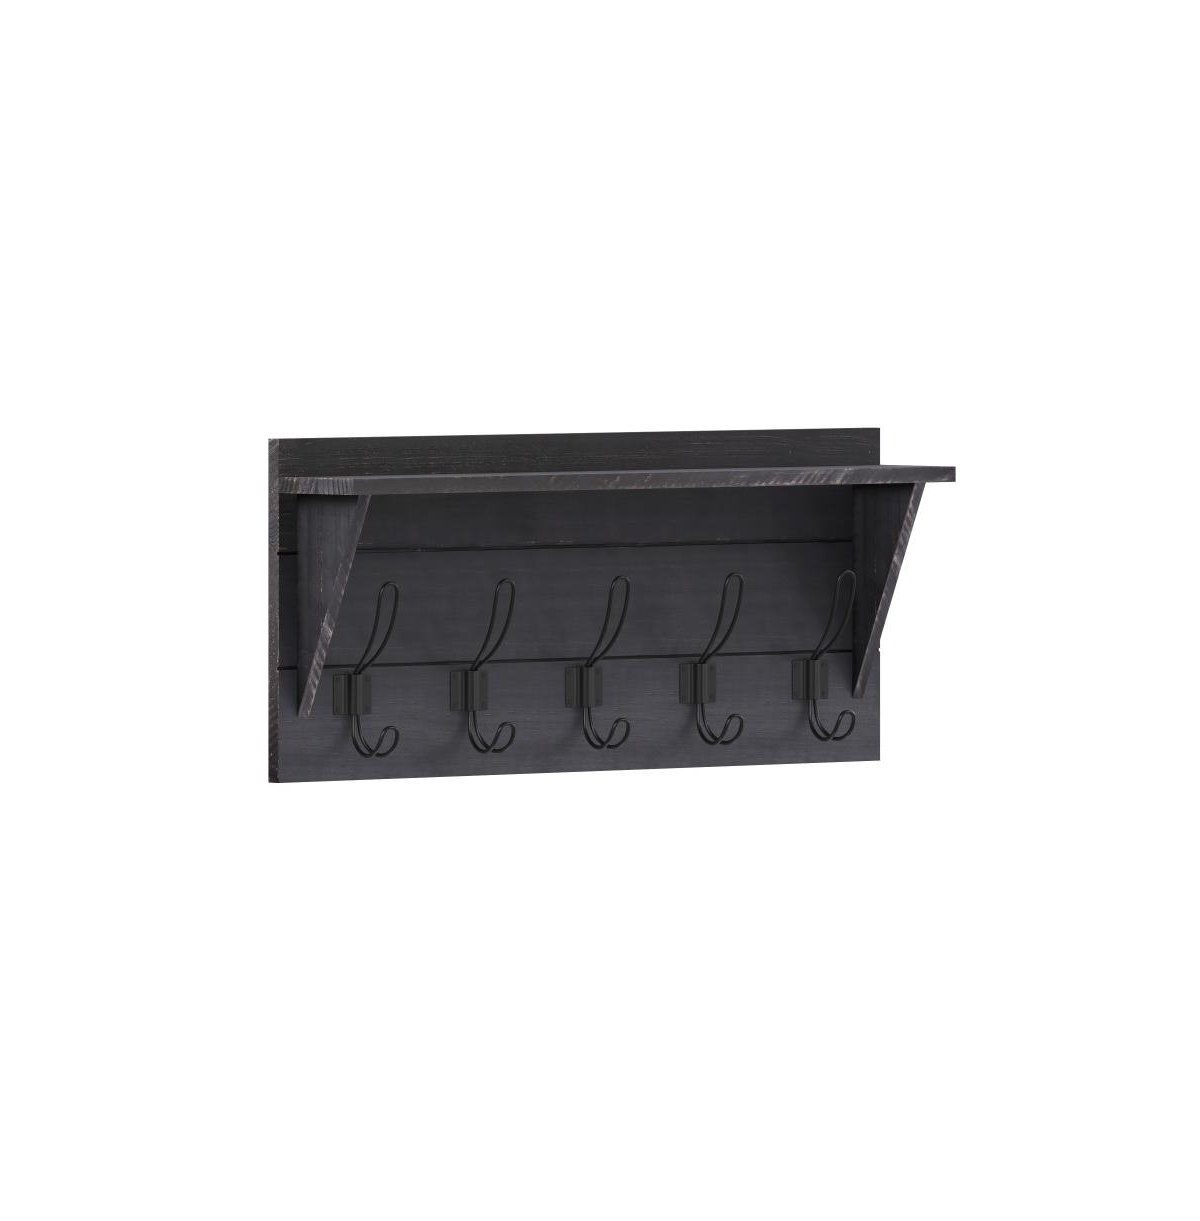 Enid Pine Wood 24 Inch Wall Mount Storage Rack With 5 Hanging Hooks And Upper Display Shelf - Black wash